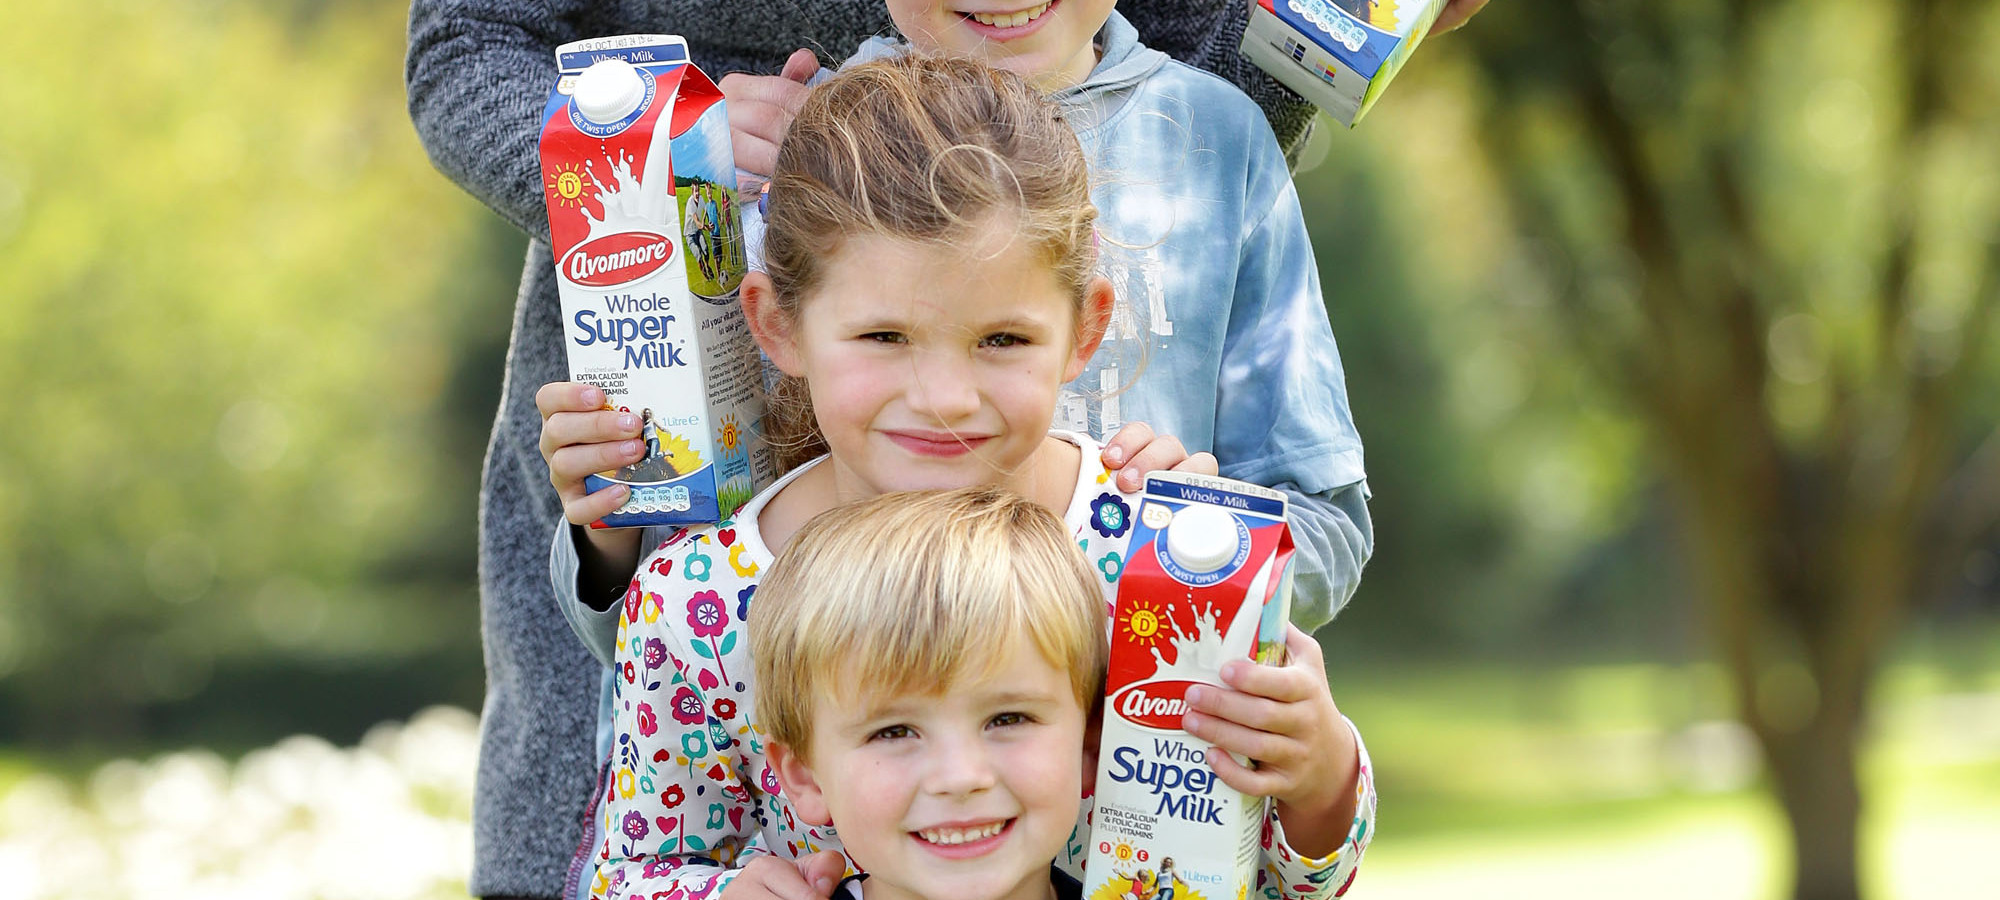 Kyle Moloney (aged 5) and Kate Cepeda (aged 6) at Glanbia Consumer Foods, at the launch of Avonmore’s new milk carton